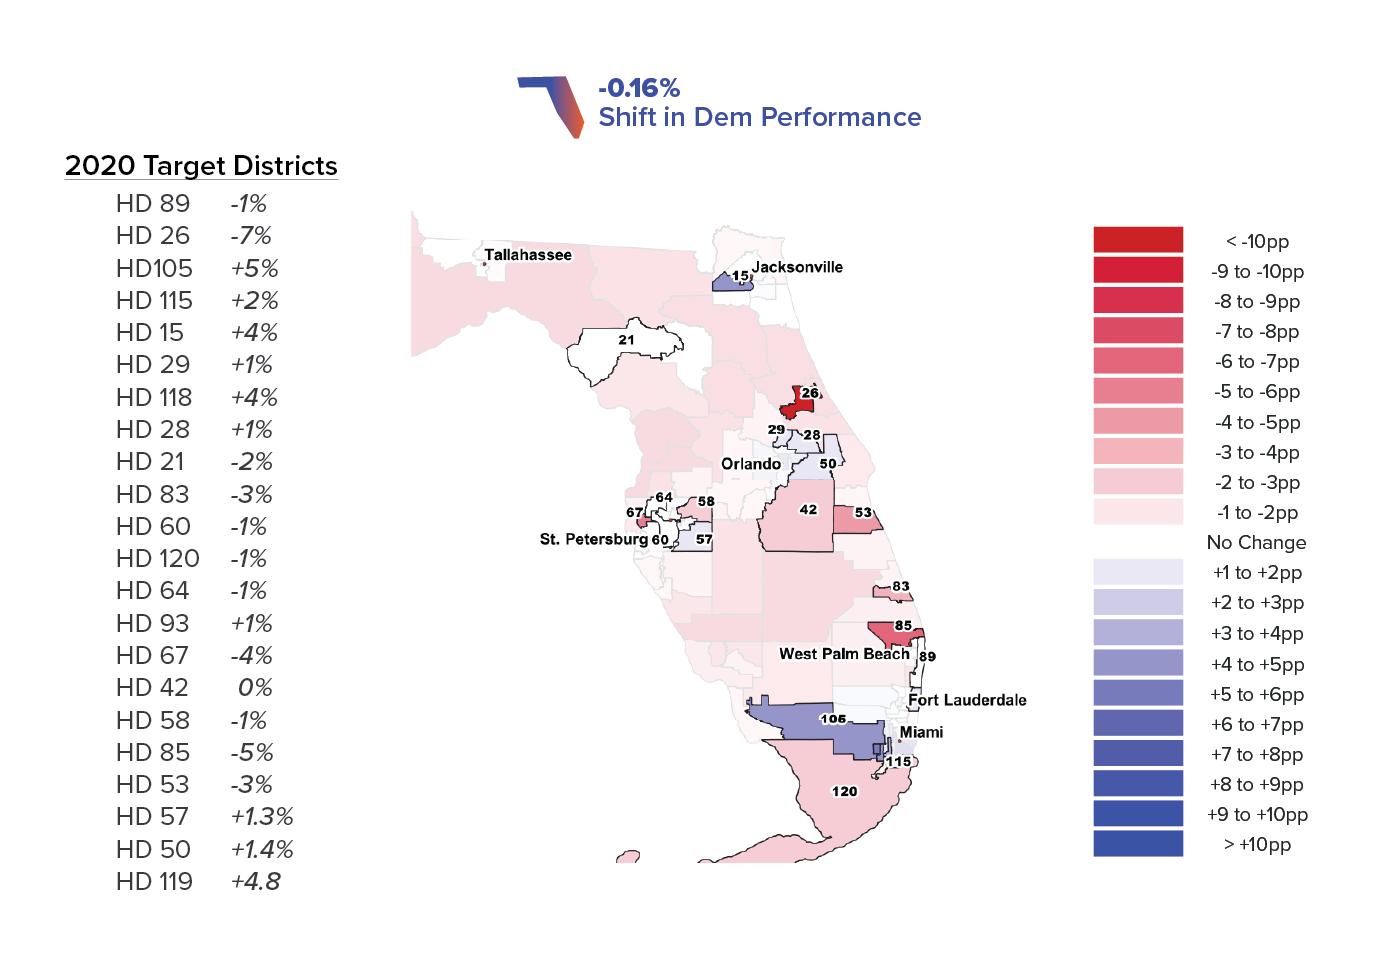 Dem Shift — Change in Dem Performance in Example Target Districts, 2010-2018Despite rhetoric about Republican gains, 2020 target districts have remained remarkably stable in their partisan lean since 2010, even as Democratic voter registration lagge…